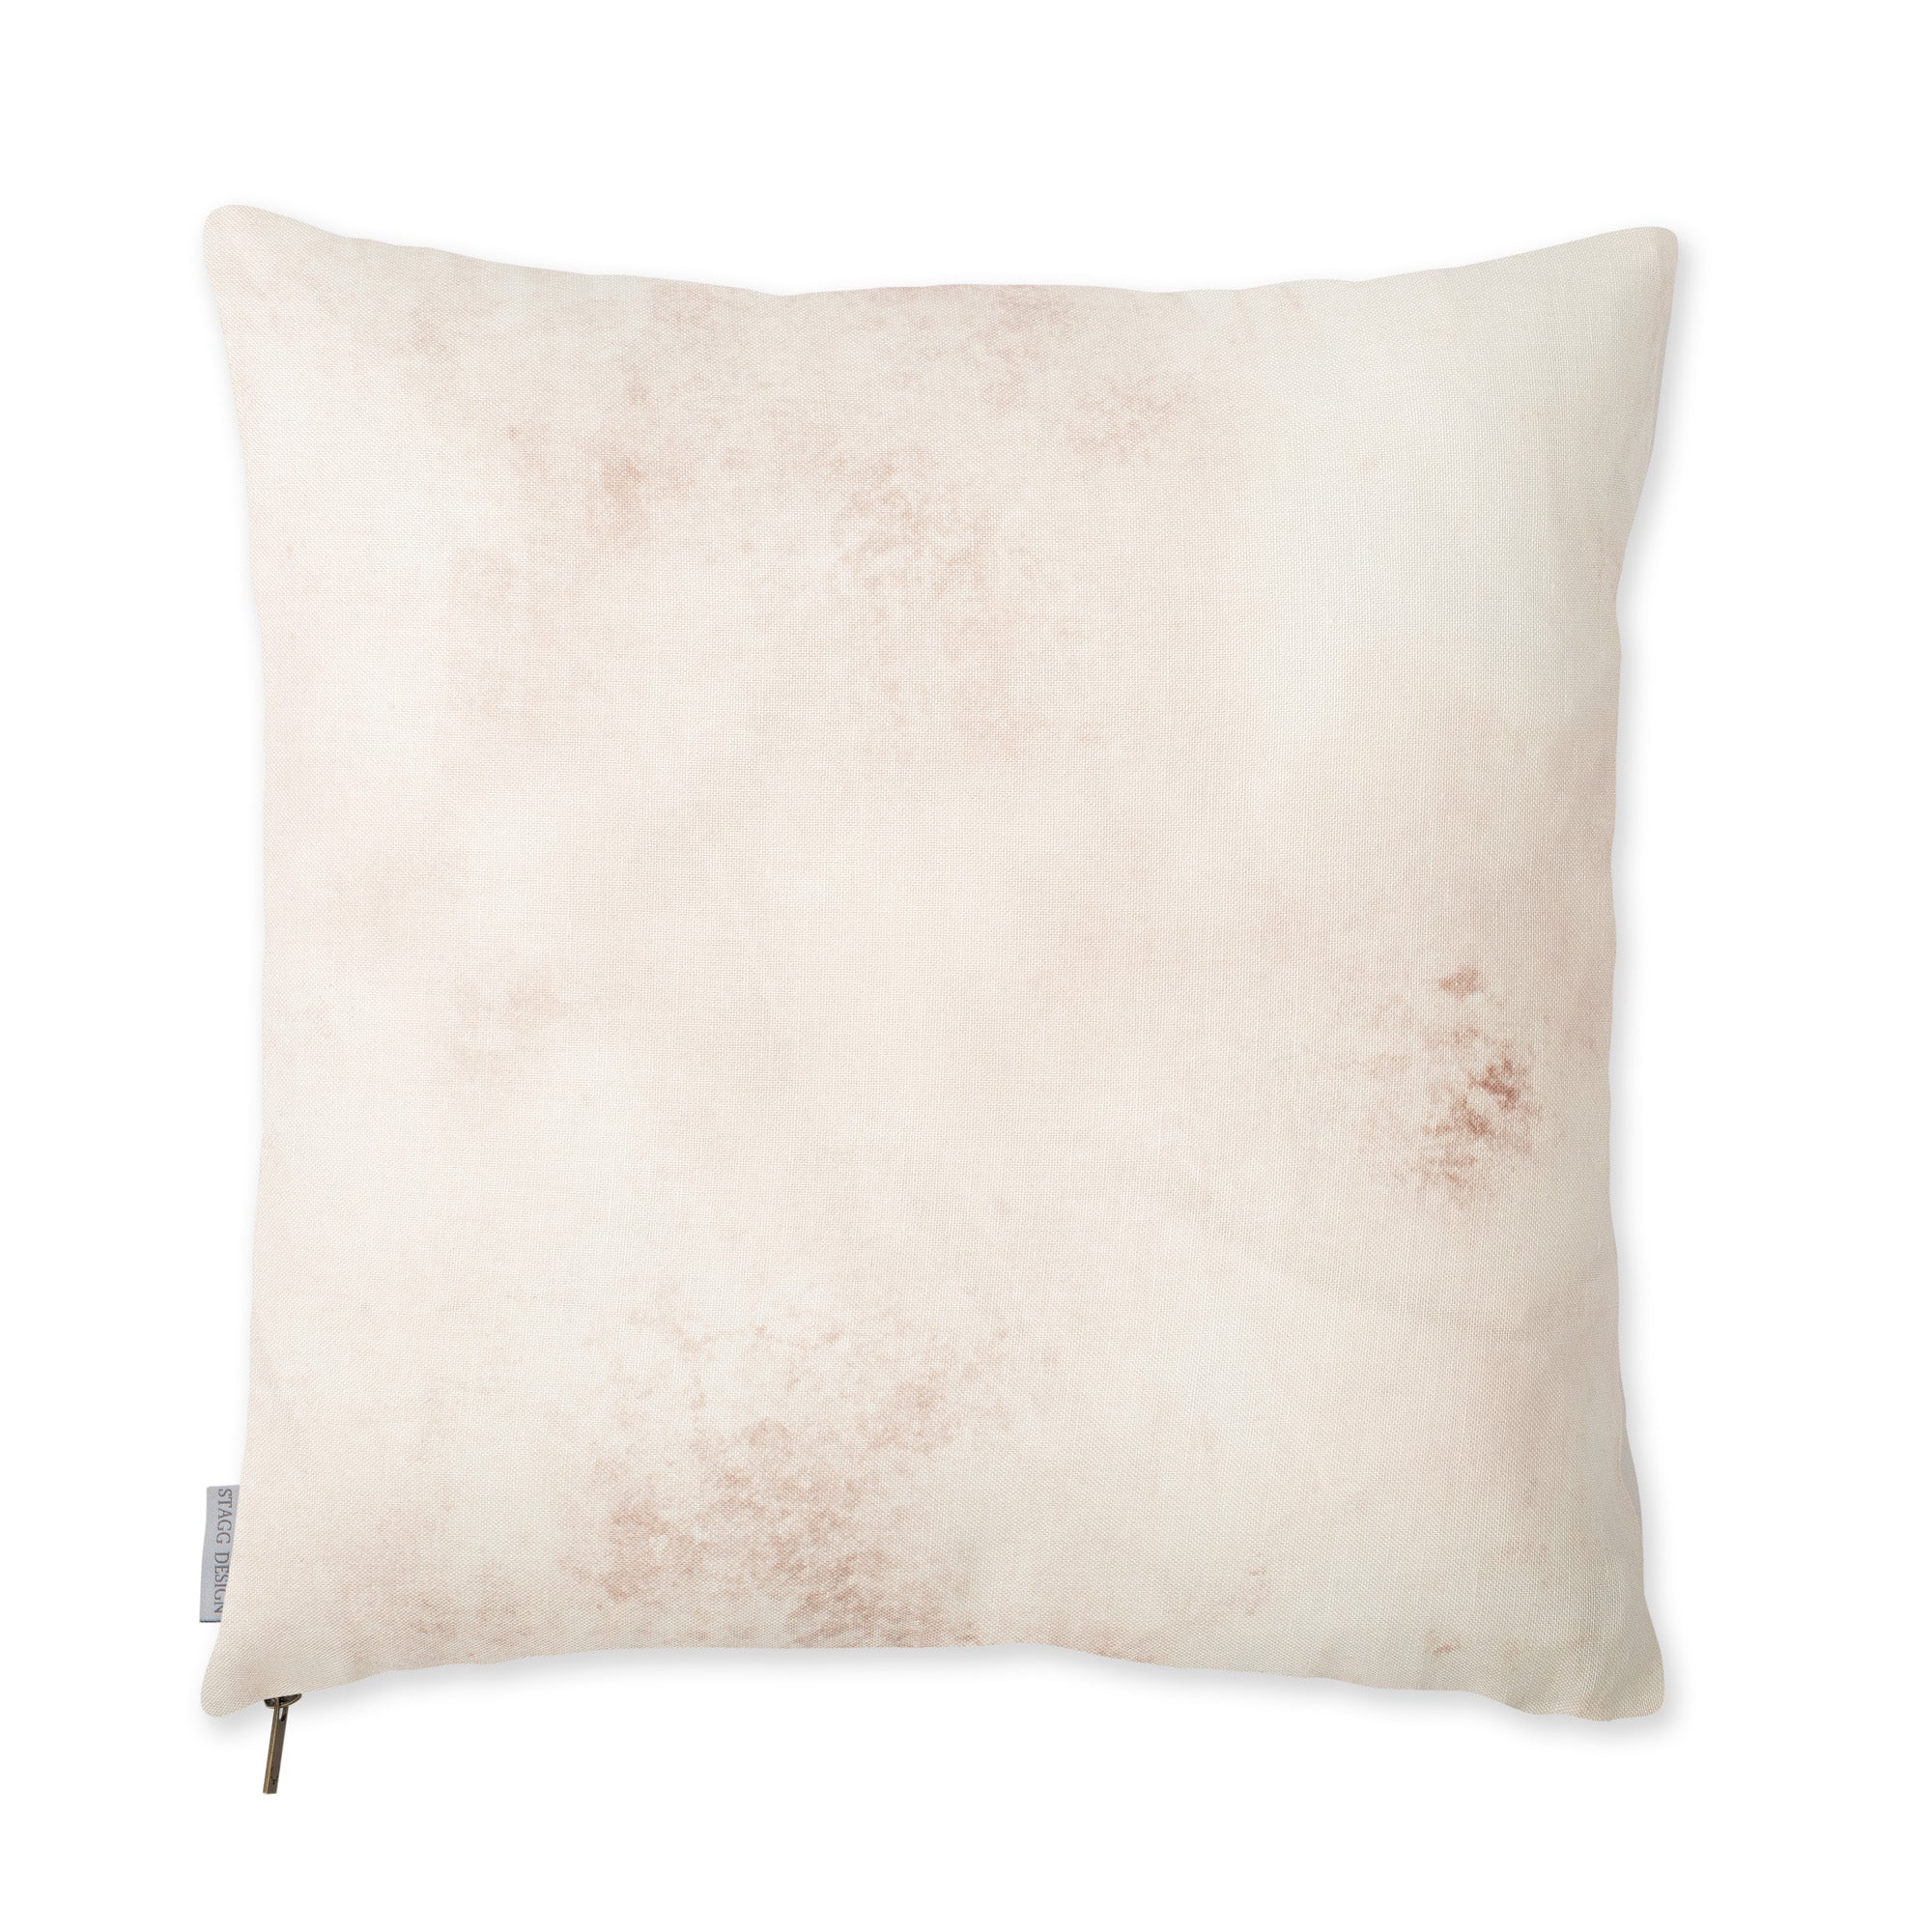 Brume Pillow - Dusty Pink